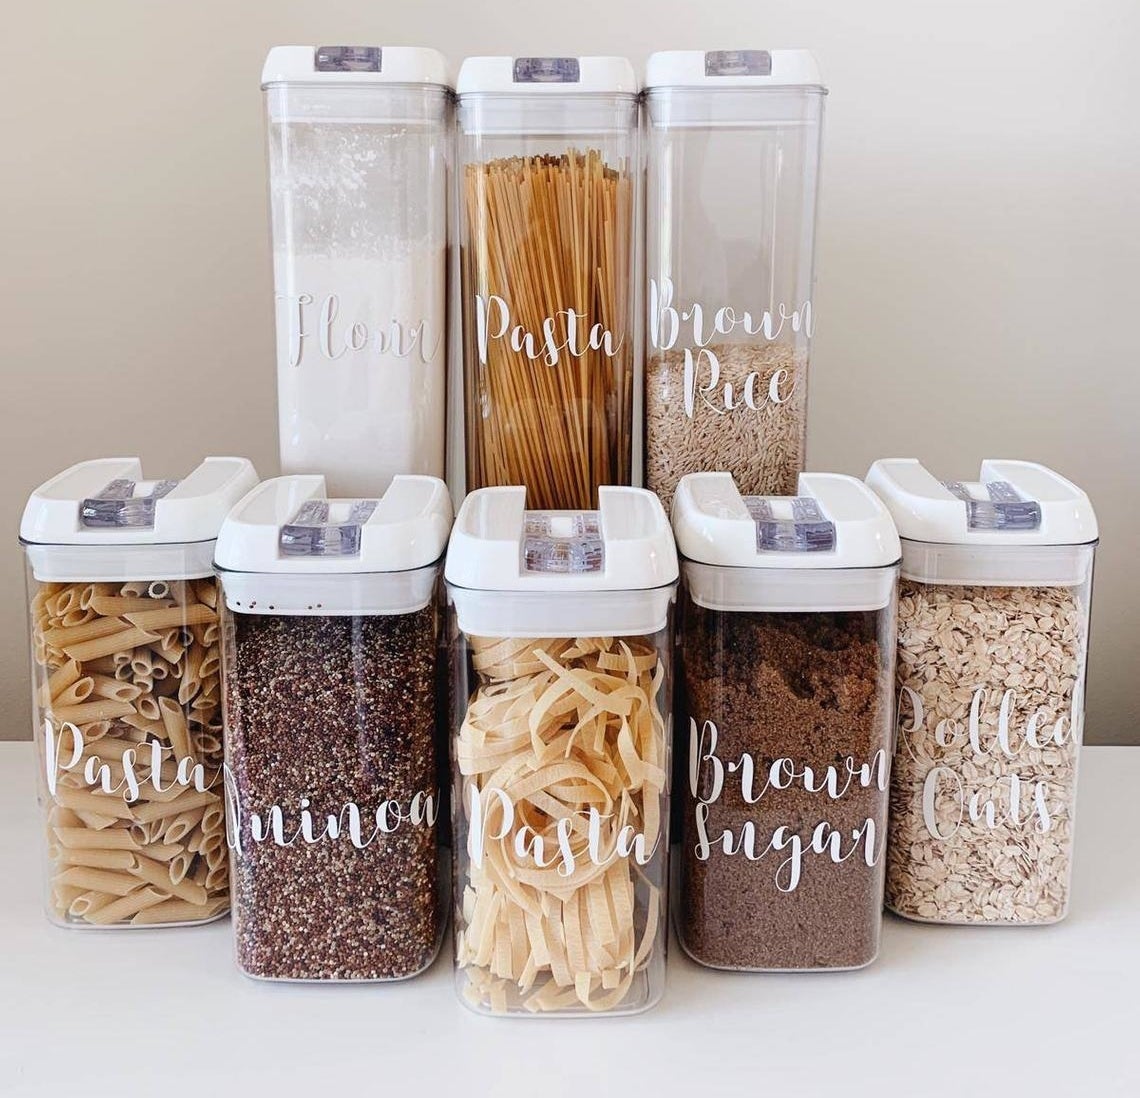 Five food storage containers with labels on the front